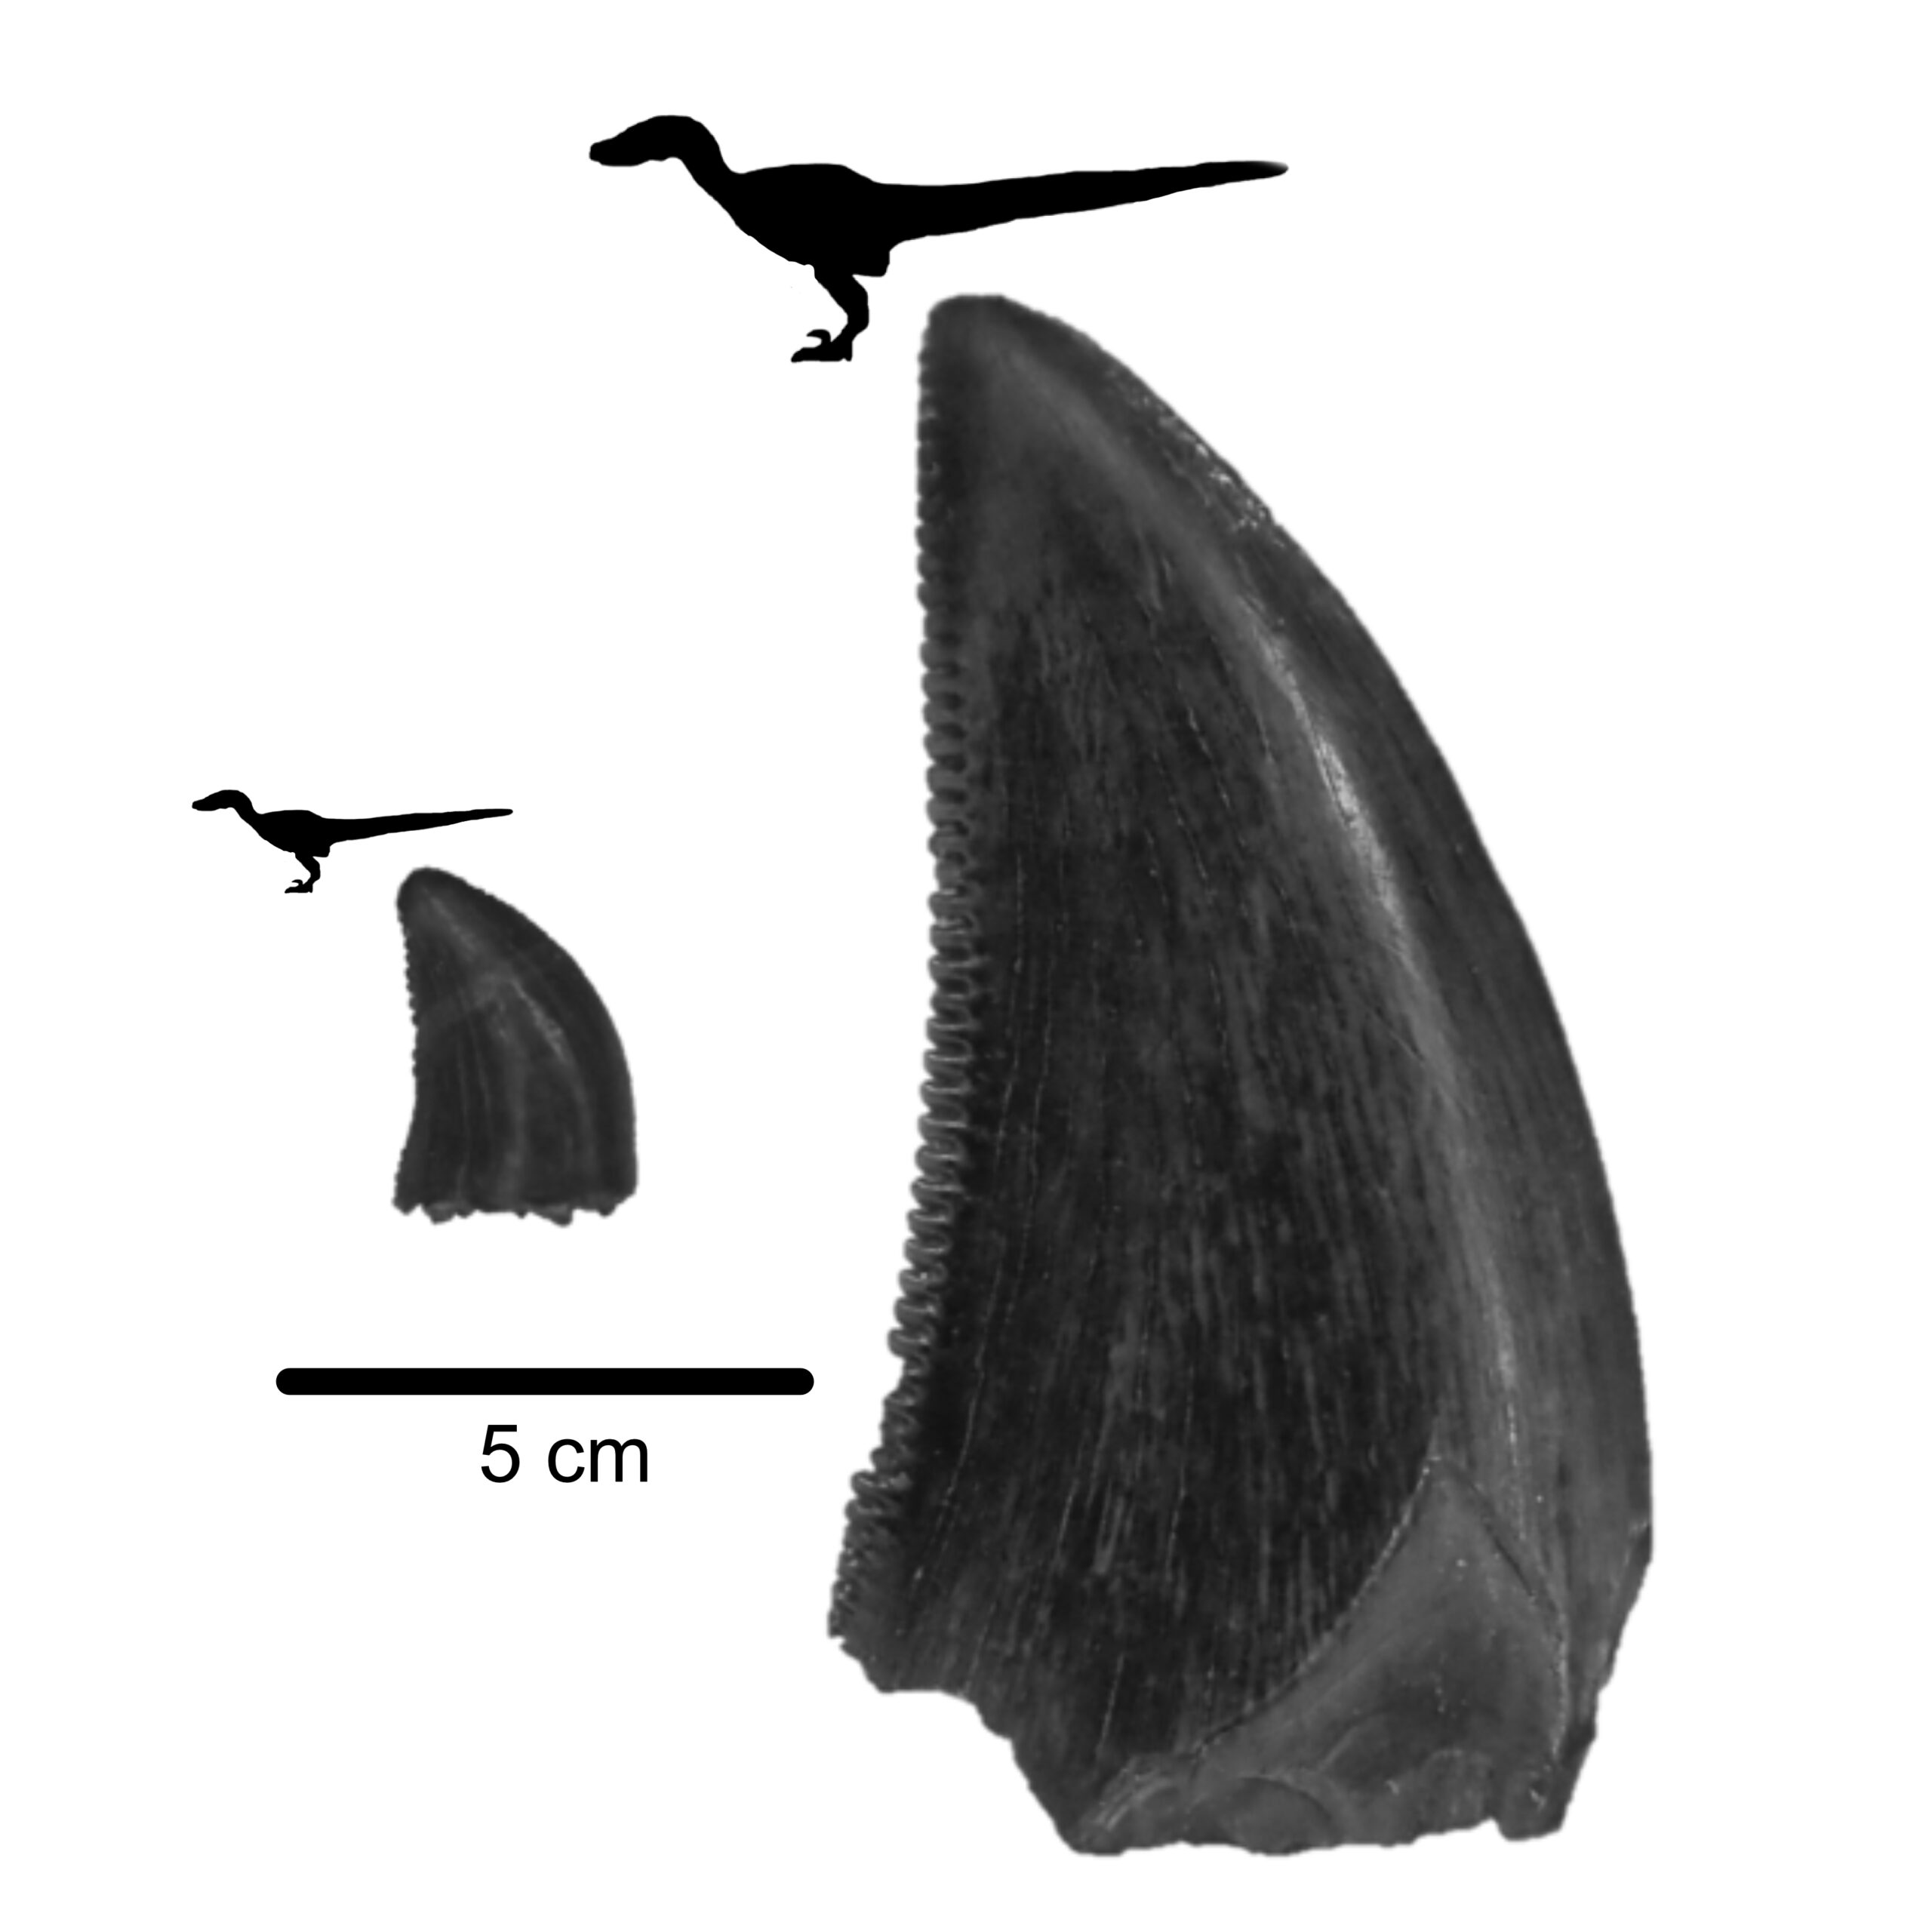 Different carbon isotopes were found in small and large teeth of deinonychus